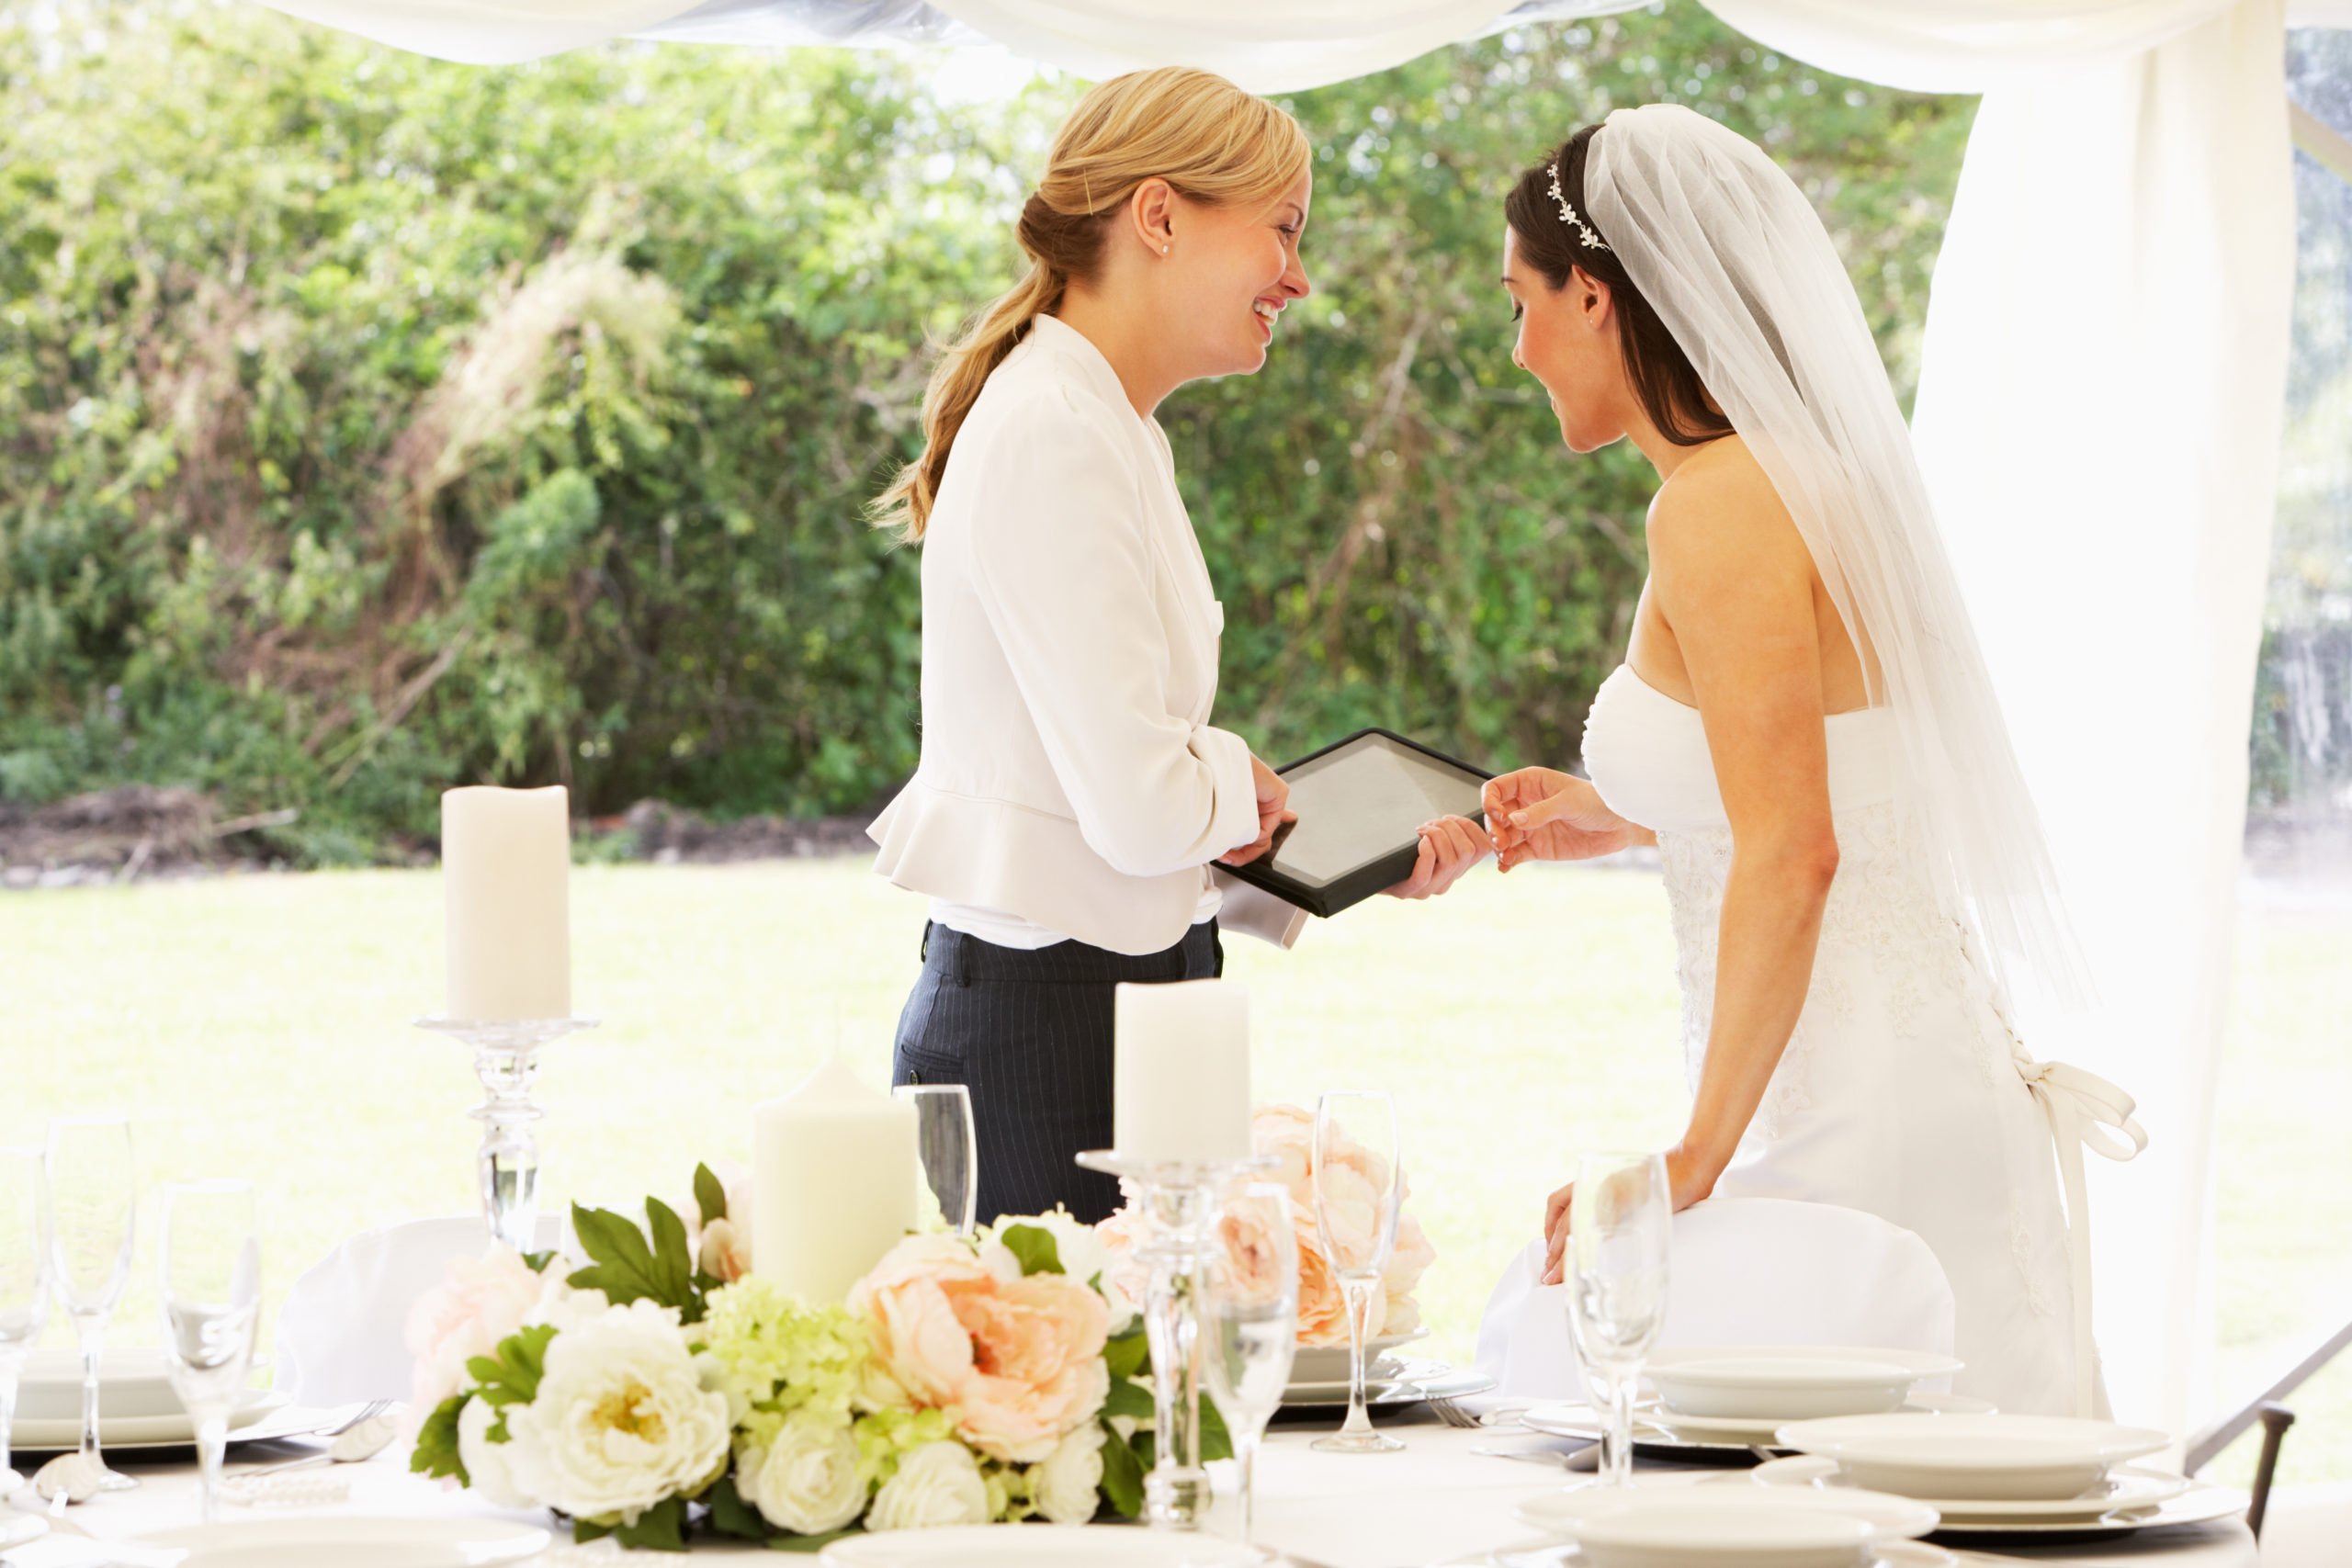 How Much Does a Wedding Planner Cost, According to Real Couples